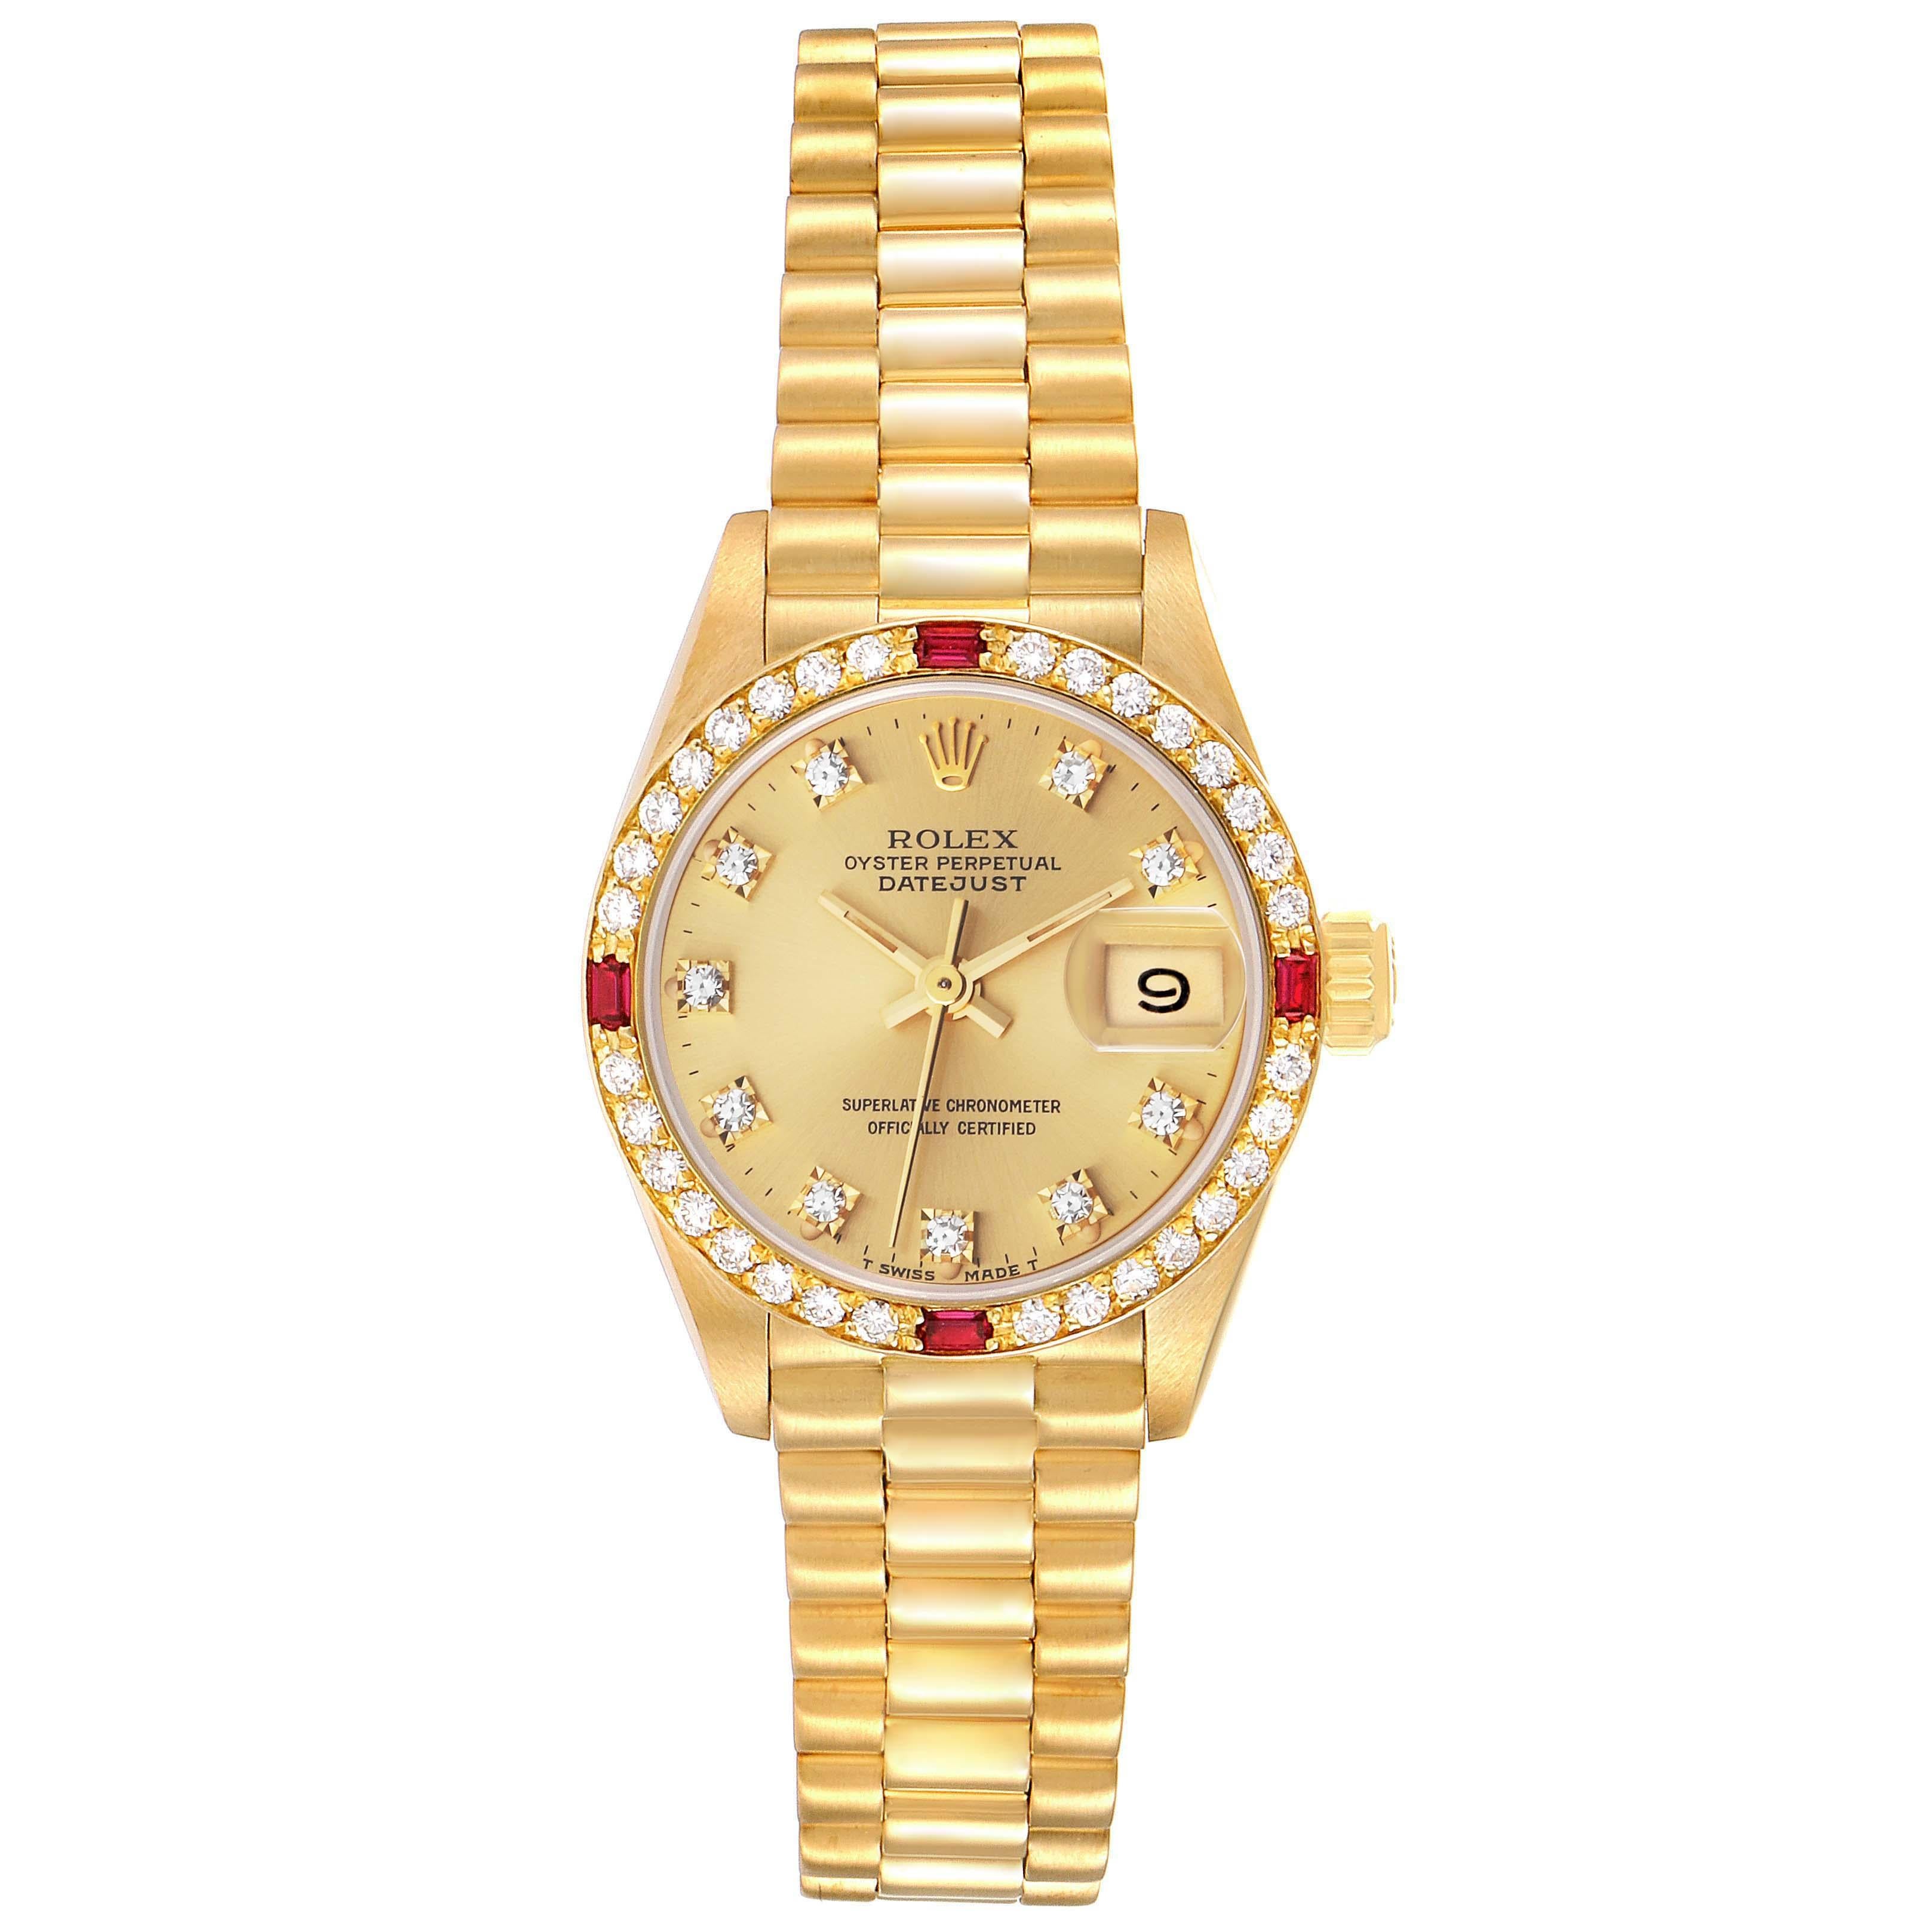 Rolex President Datejust Yellow Gold Diamond Ruby Ladies Watch 69068. Officially certified chronometer self-winding movement. 18k yellow gold oyster case 26.0 mm in diameter. Rolex logo on a crown. Original Rolex factory diamond and ruby bezel.